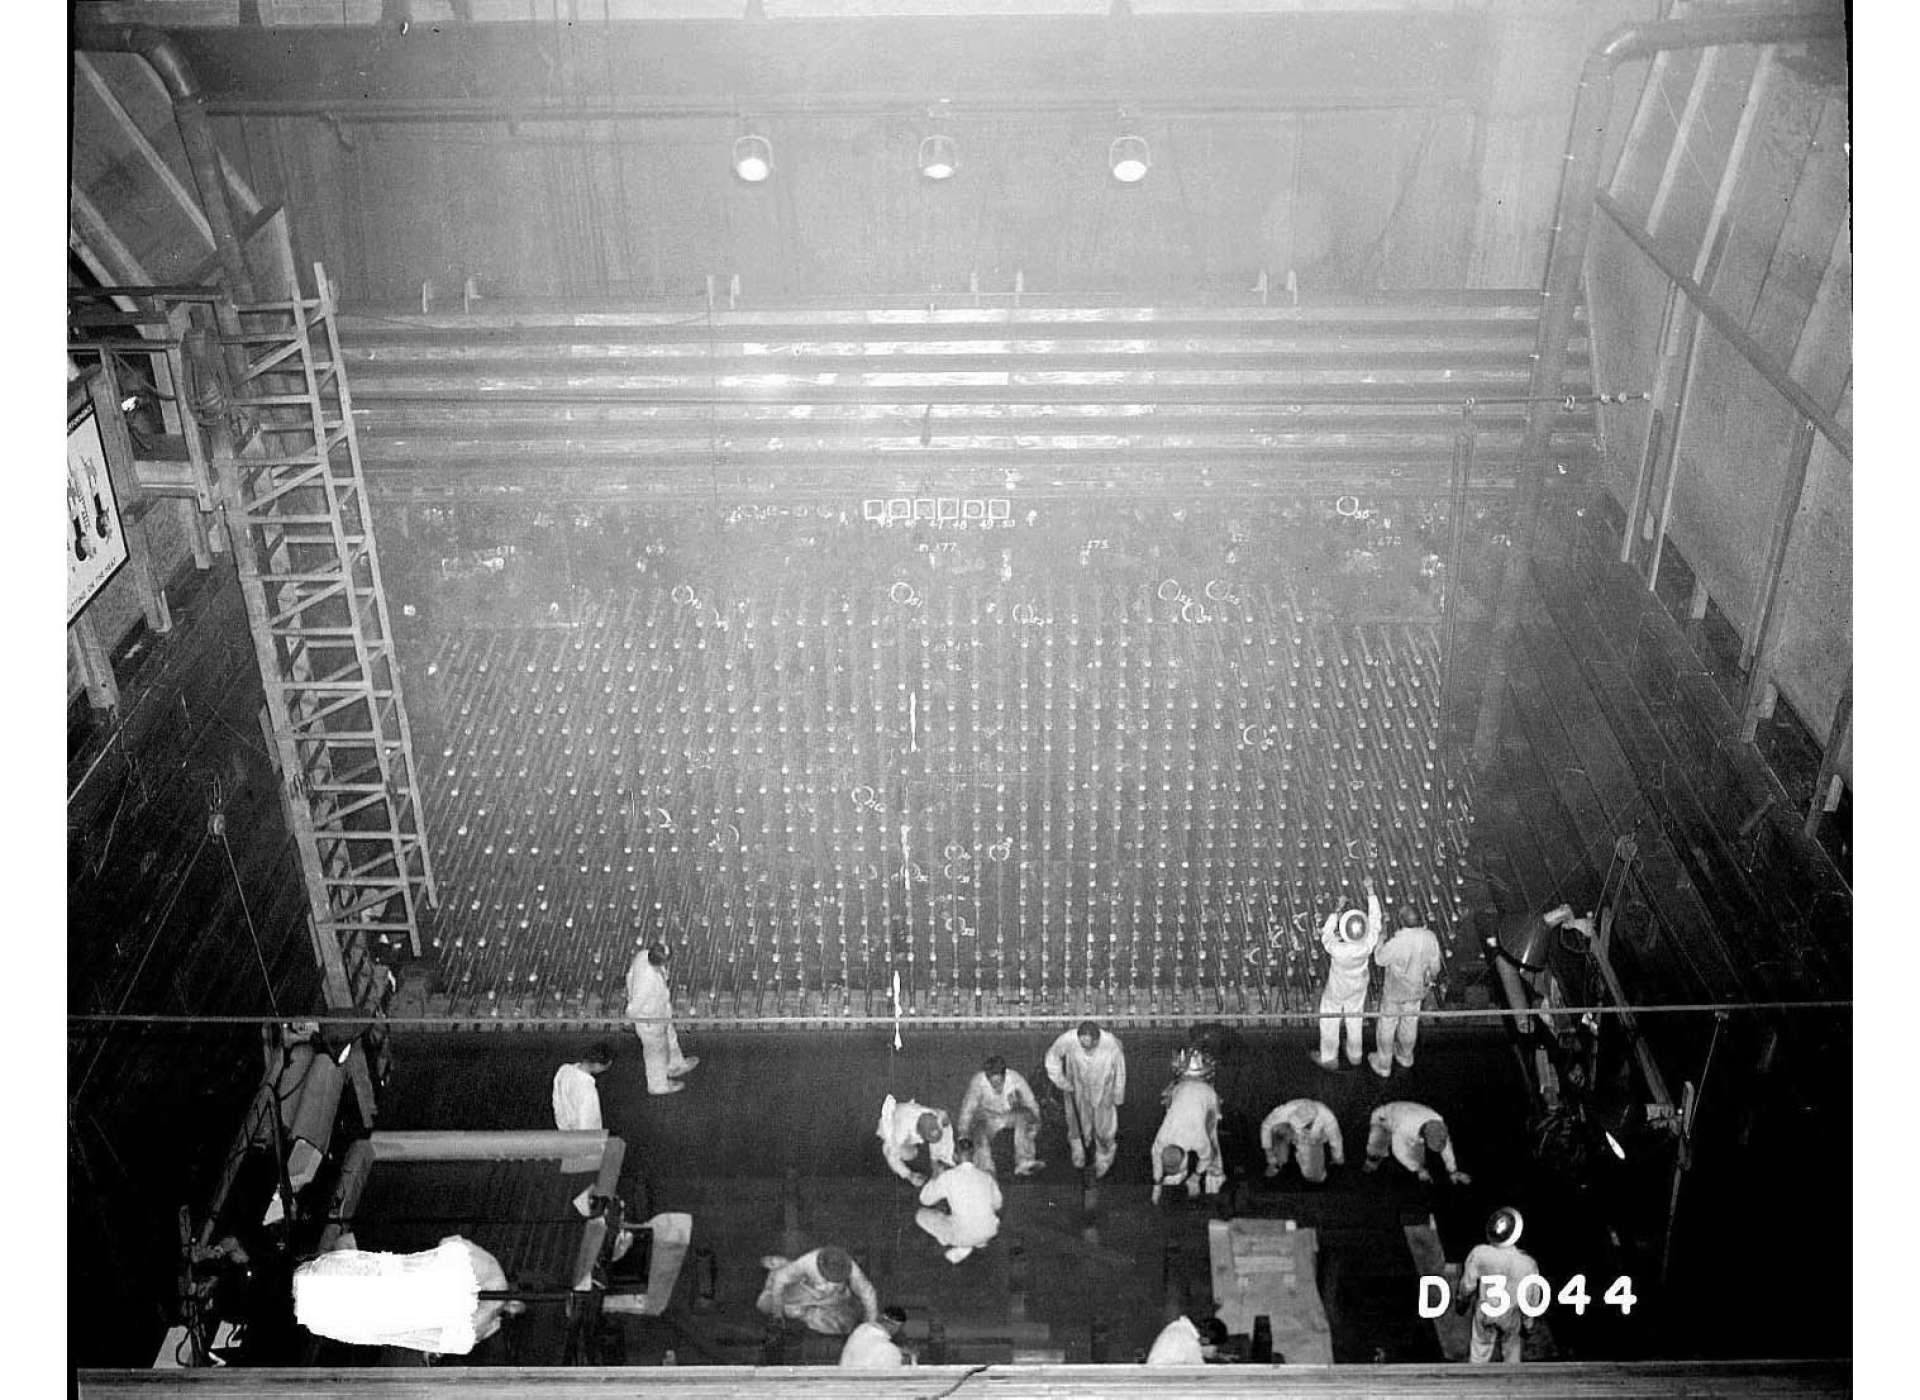 Men working near the face of B Reactor in 1944. Courtesy of The National Archives.